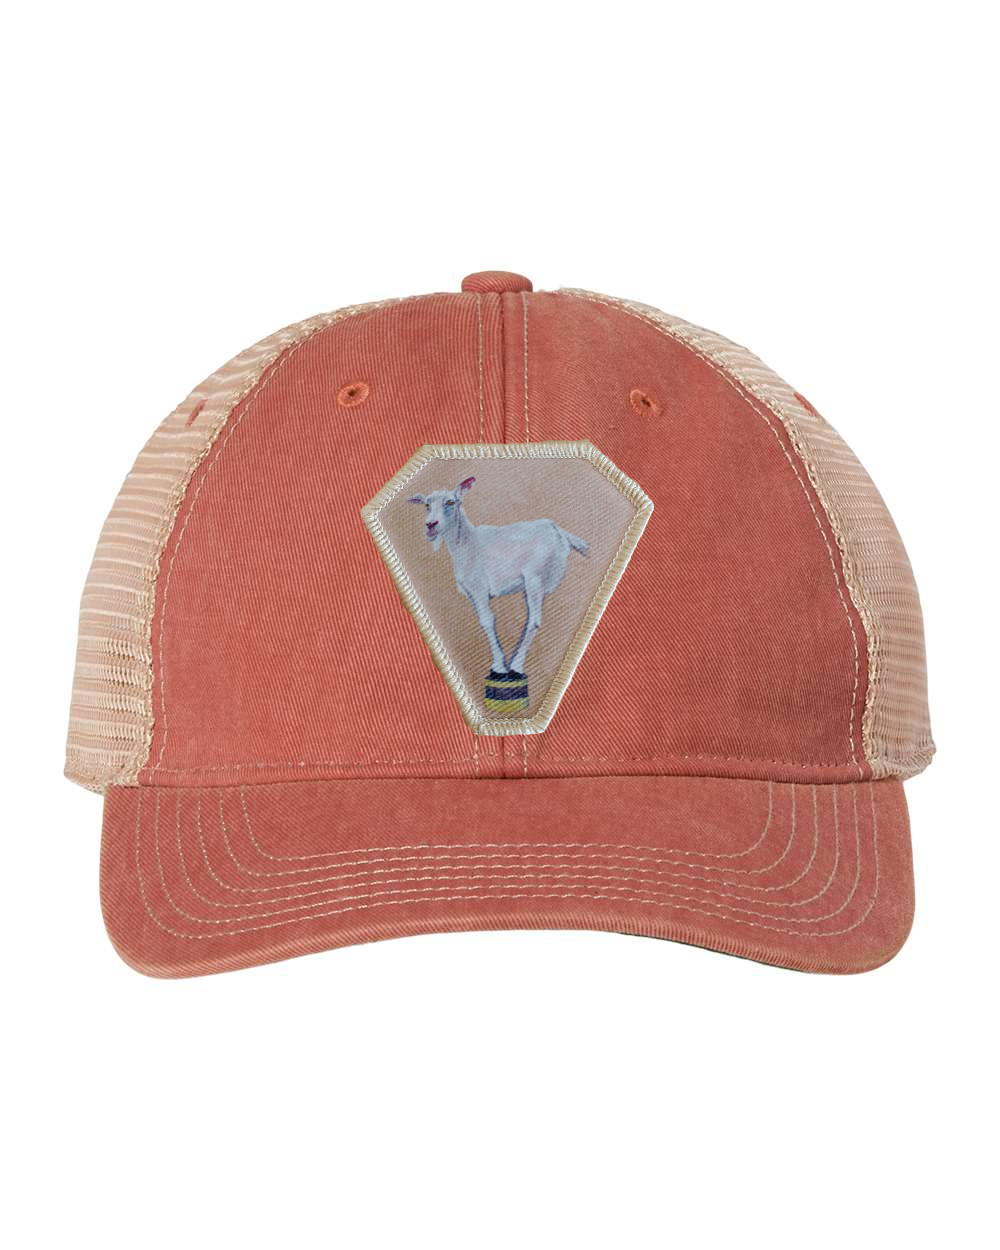 Nantucket Red Unstructured Hats Flyn Costello Diamond Goat  